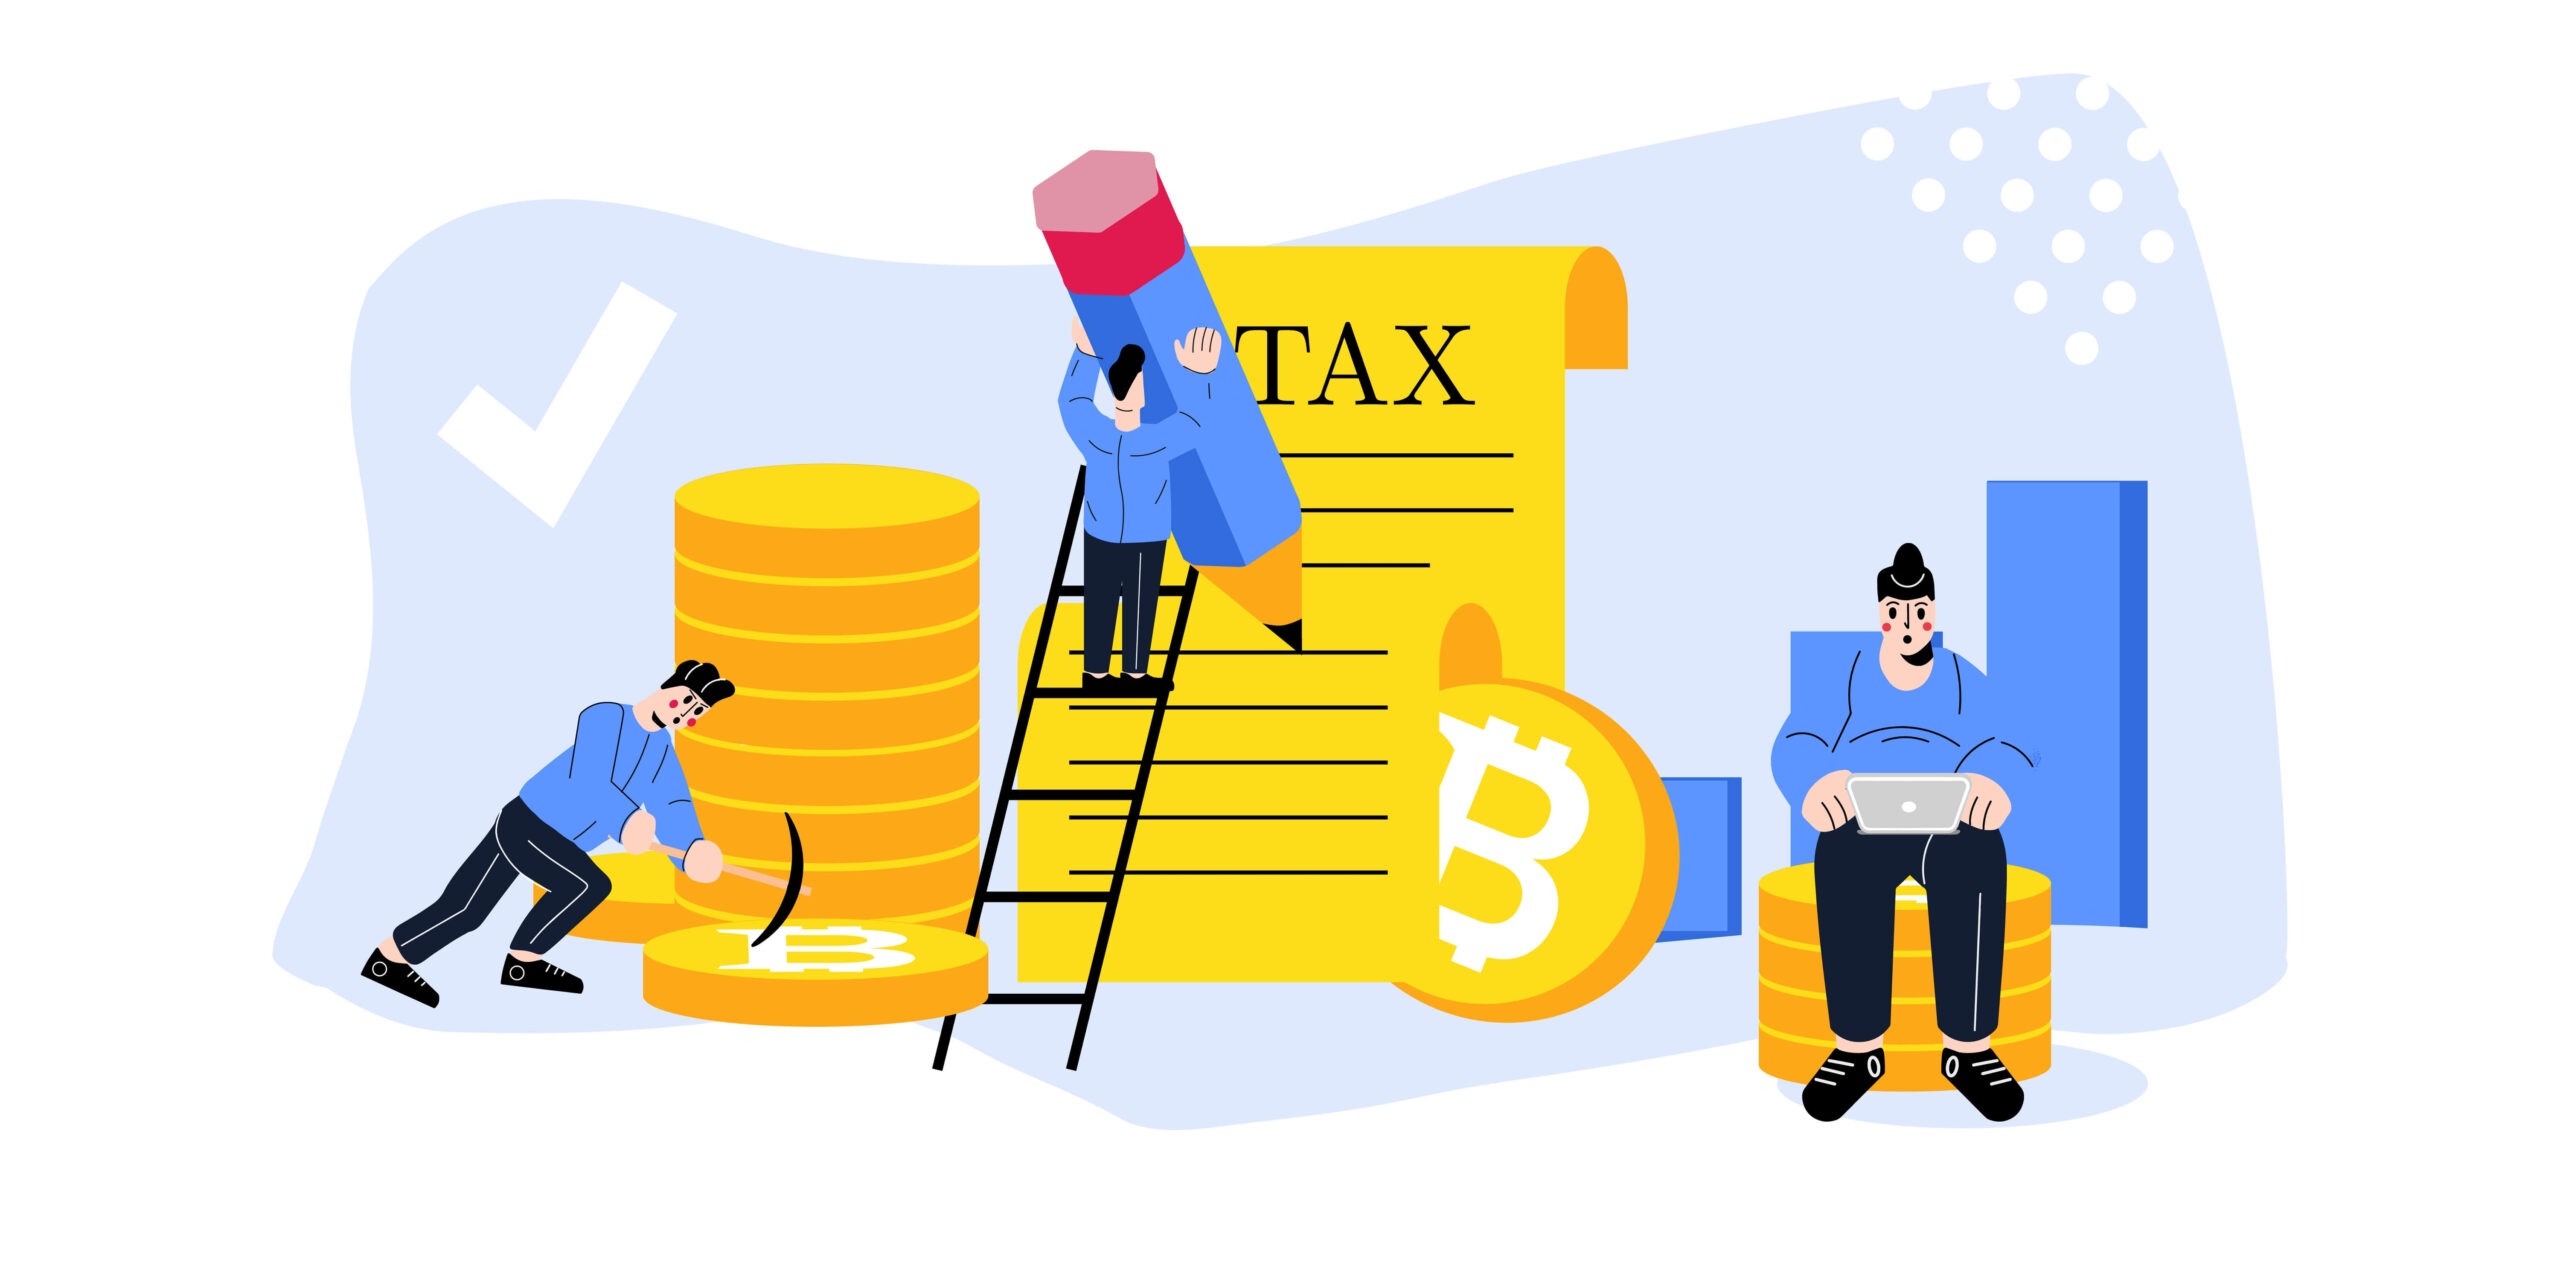 Illustration for crypto tax with bitcoin